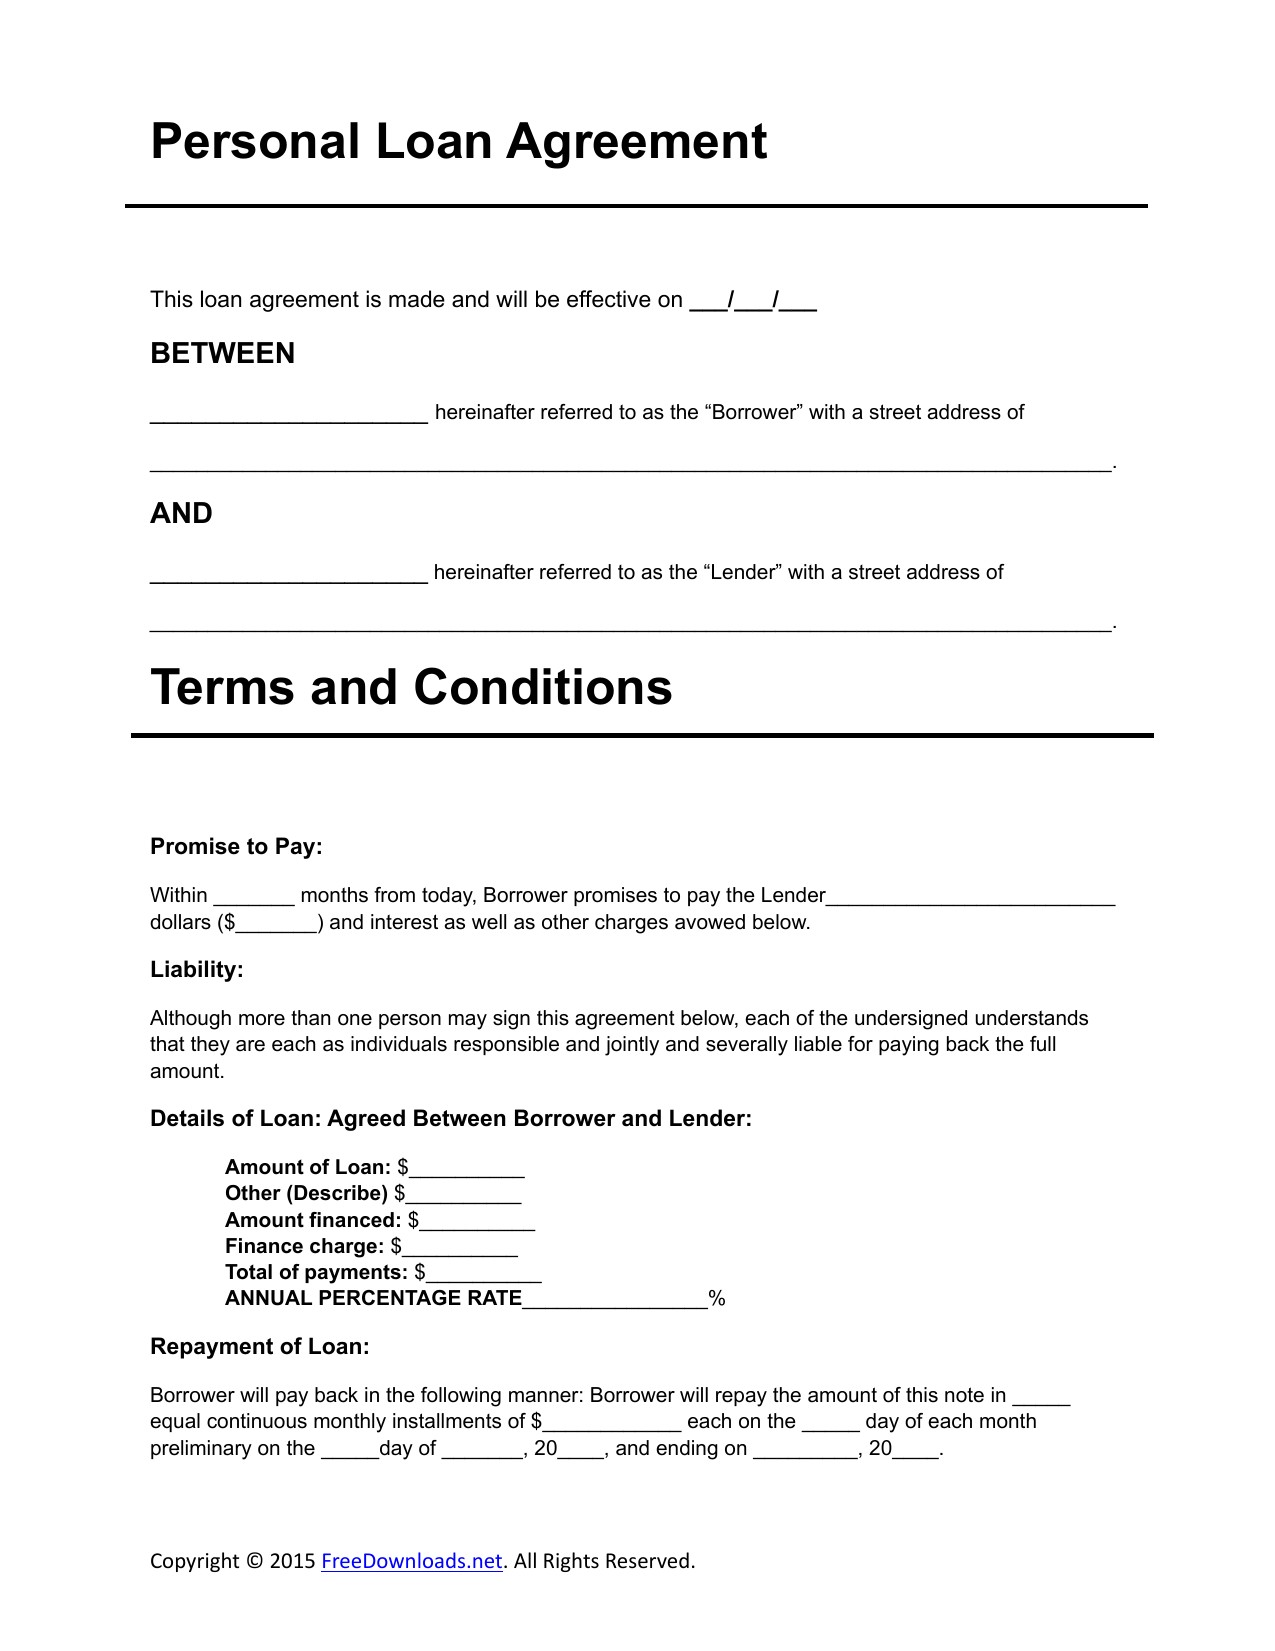 Download Personal Loan Agreement Template PDF RTF Word Document